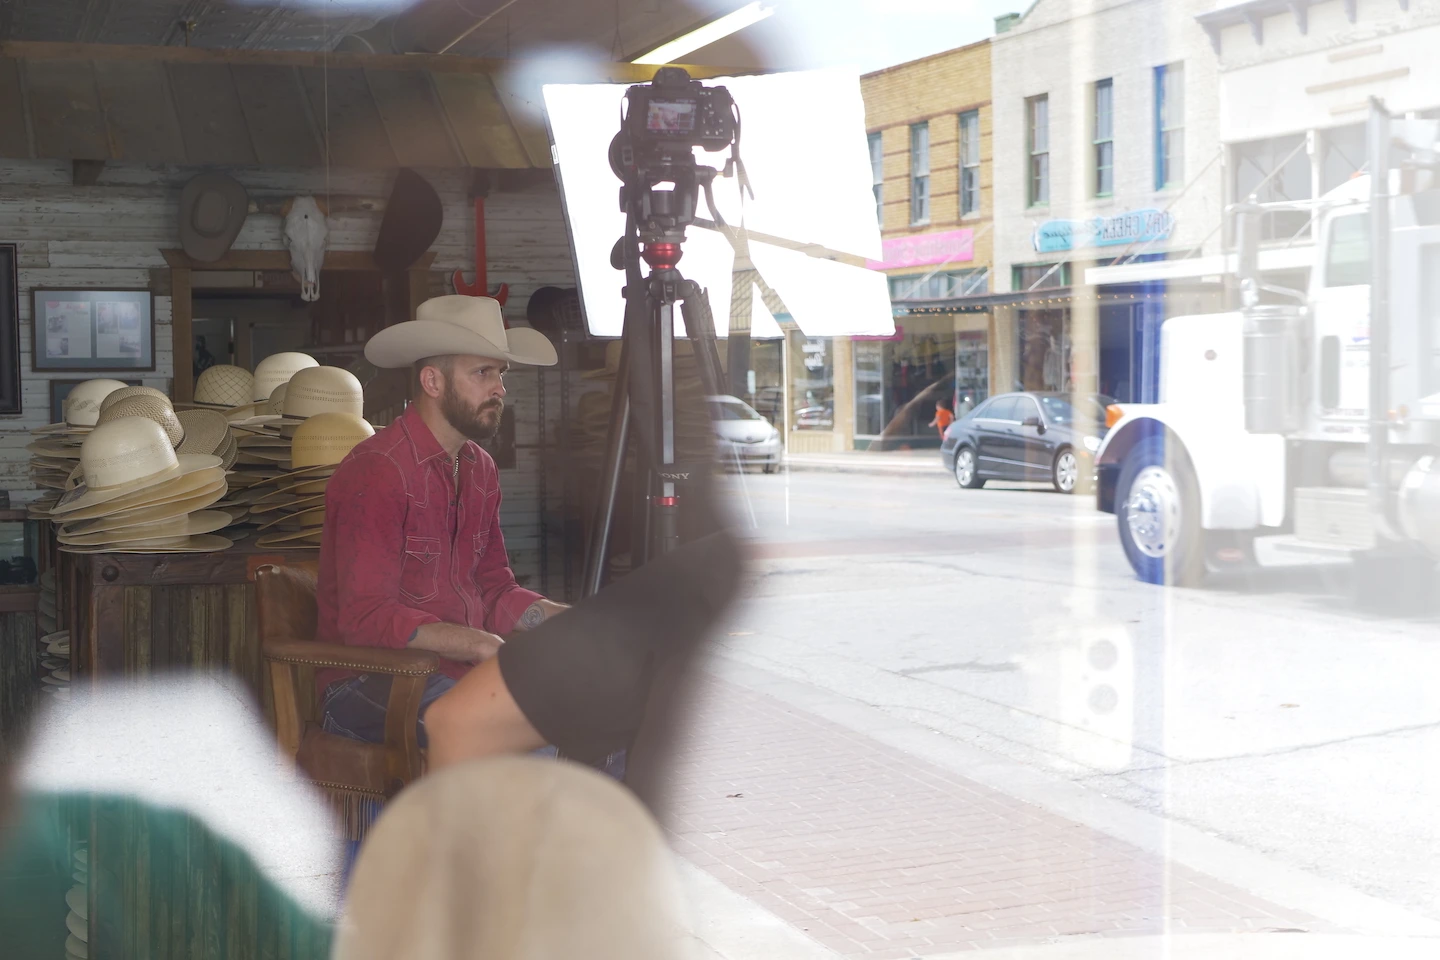 Window reflection of a Biggar Hats team member on set with a video production company in Dallas.